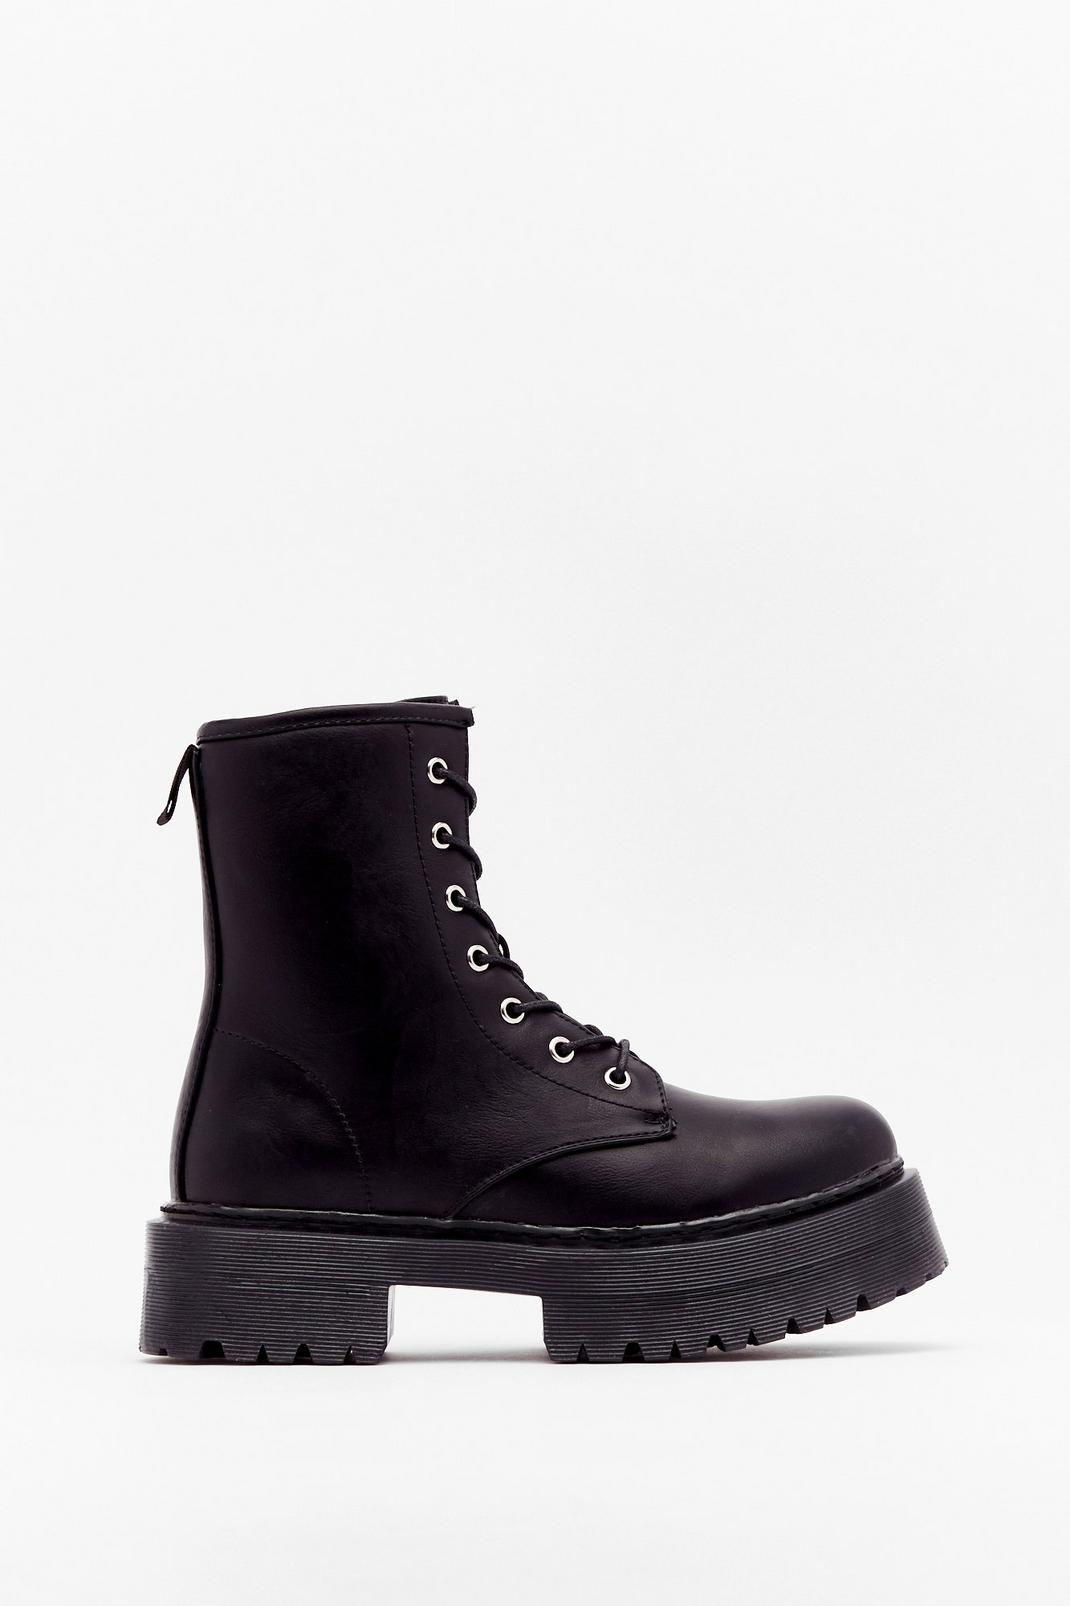 Hit the Road Lace-Up Platform Boots | Nasty Gal